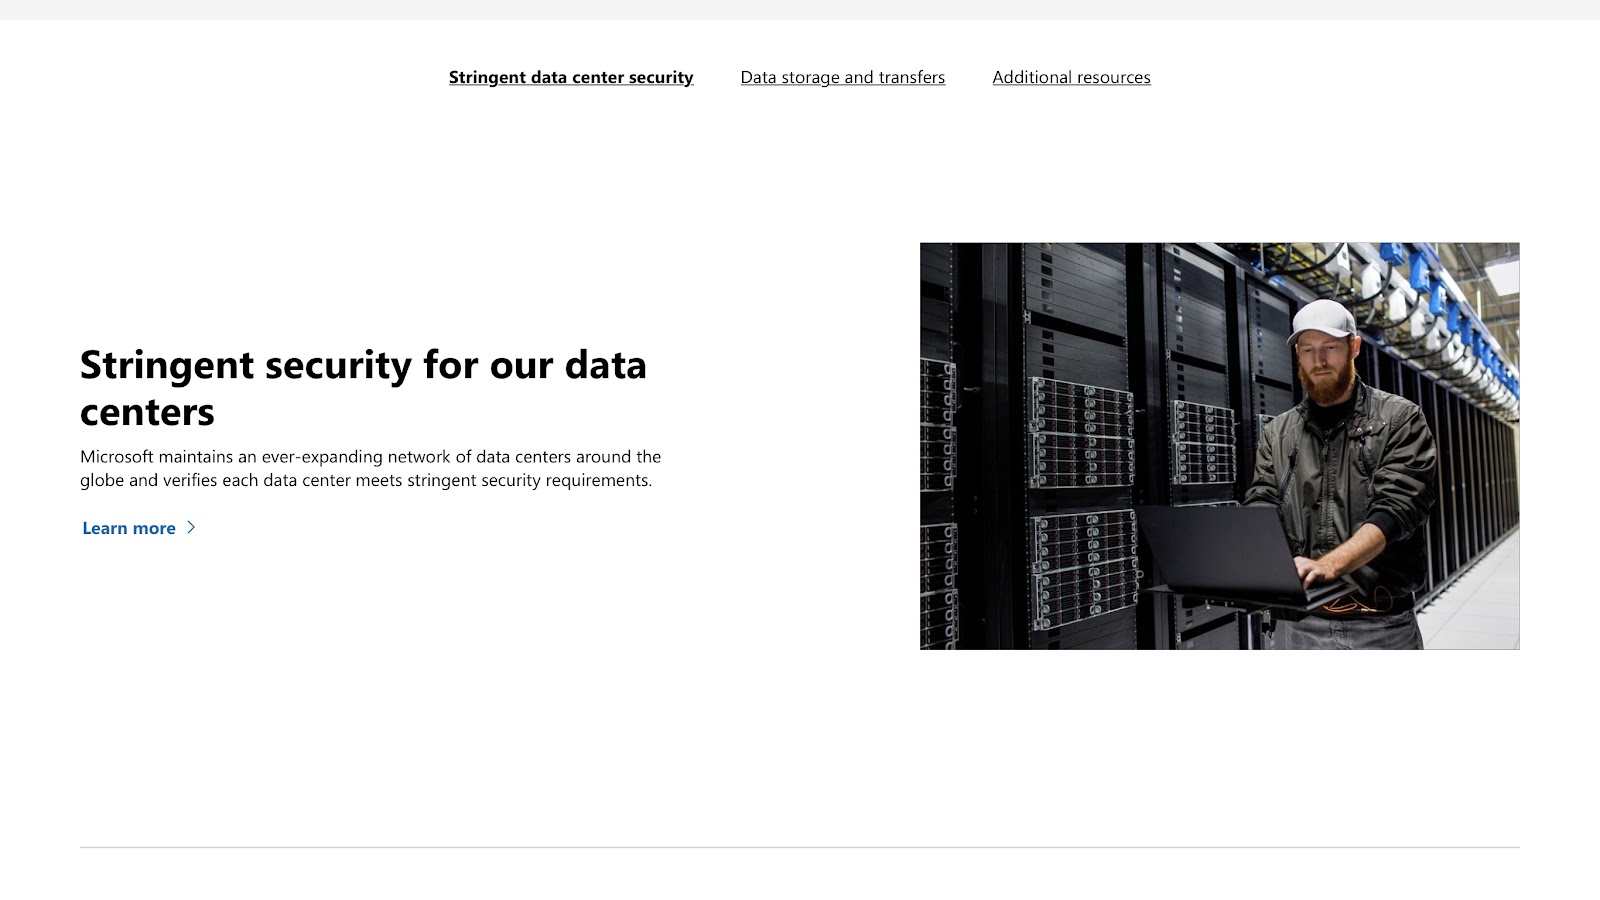 OneDrive's webpage discussing data center safety